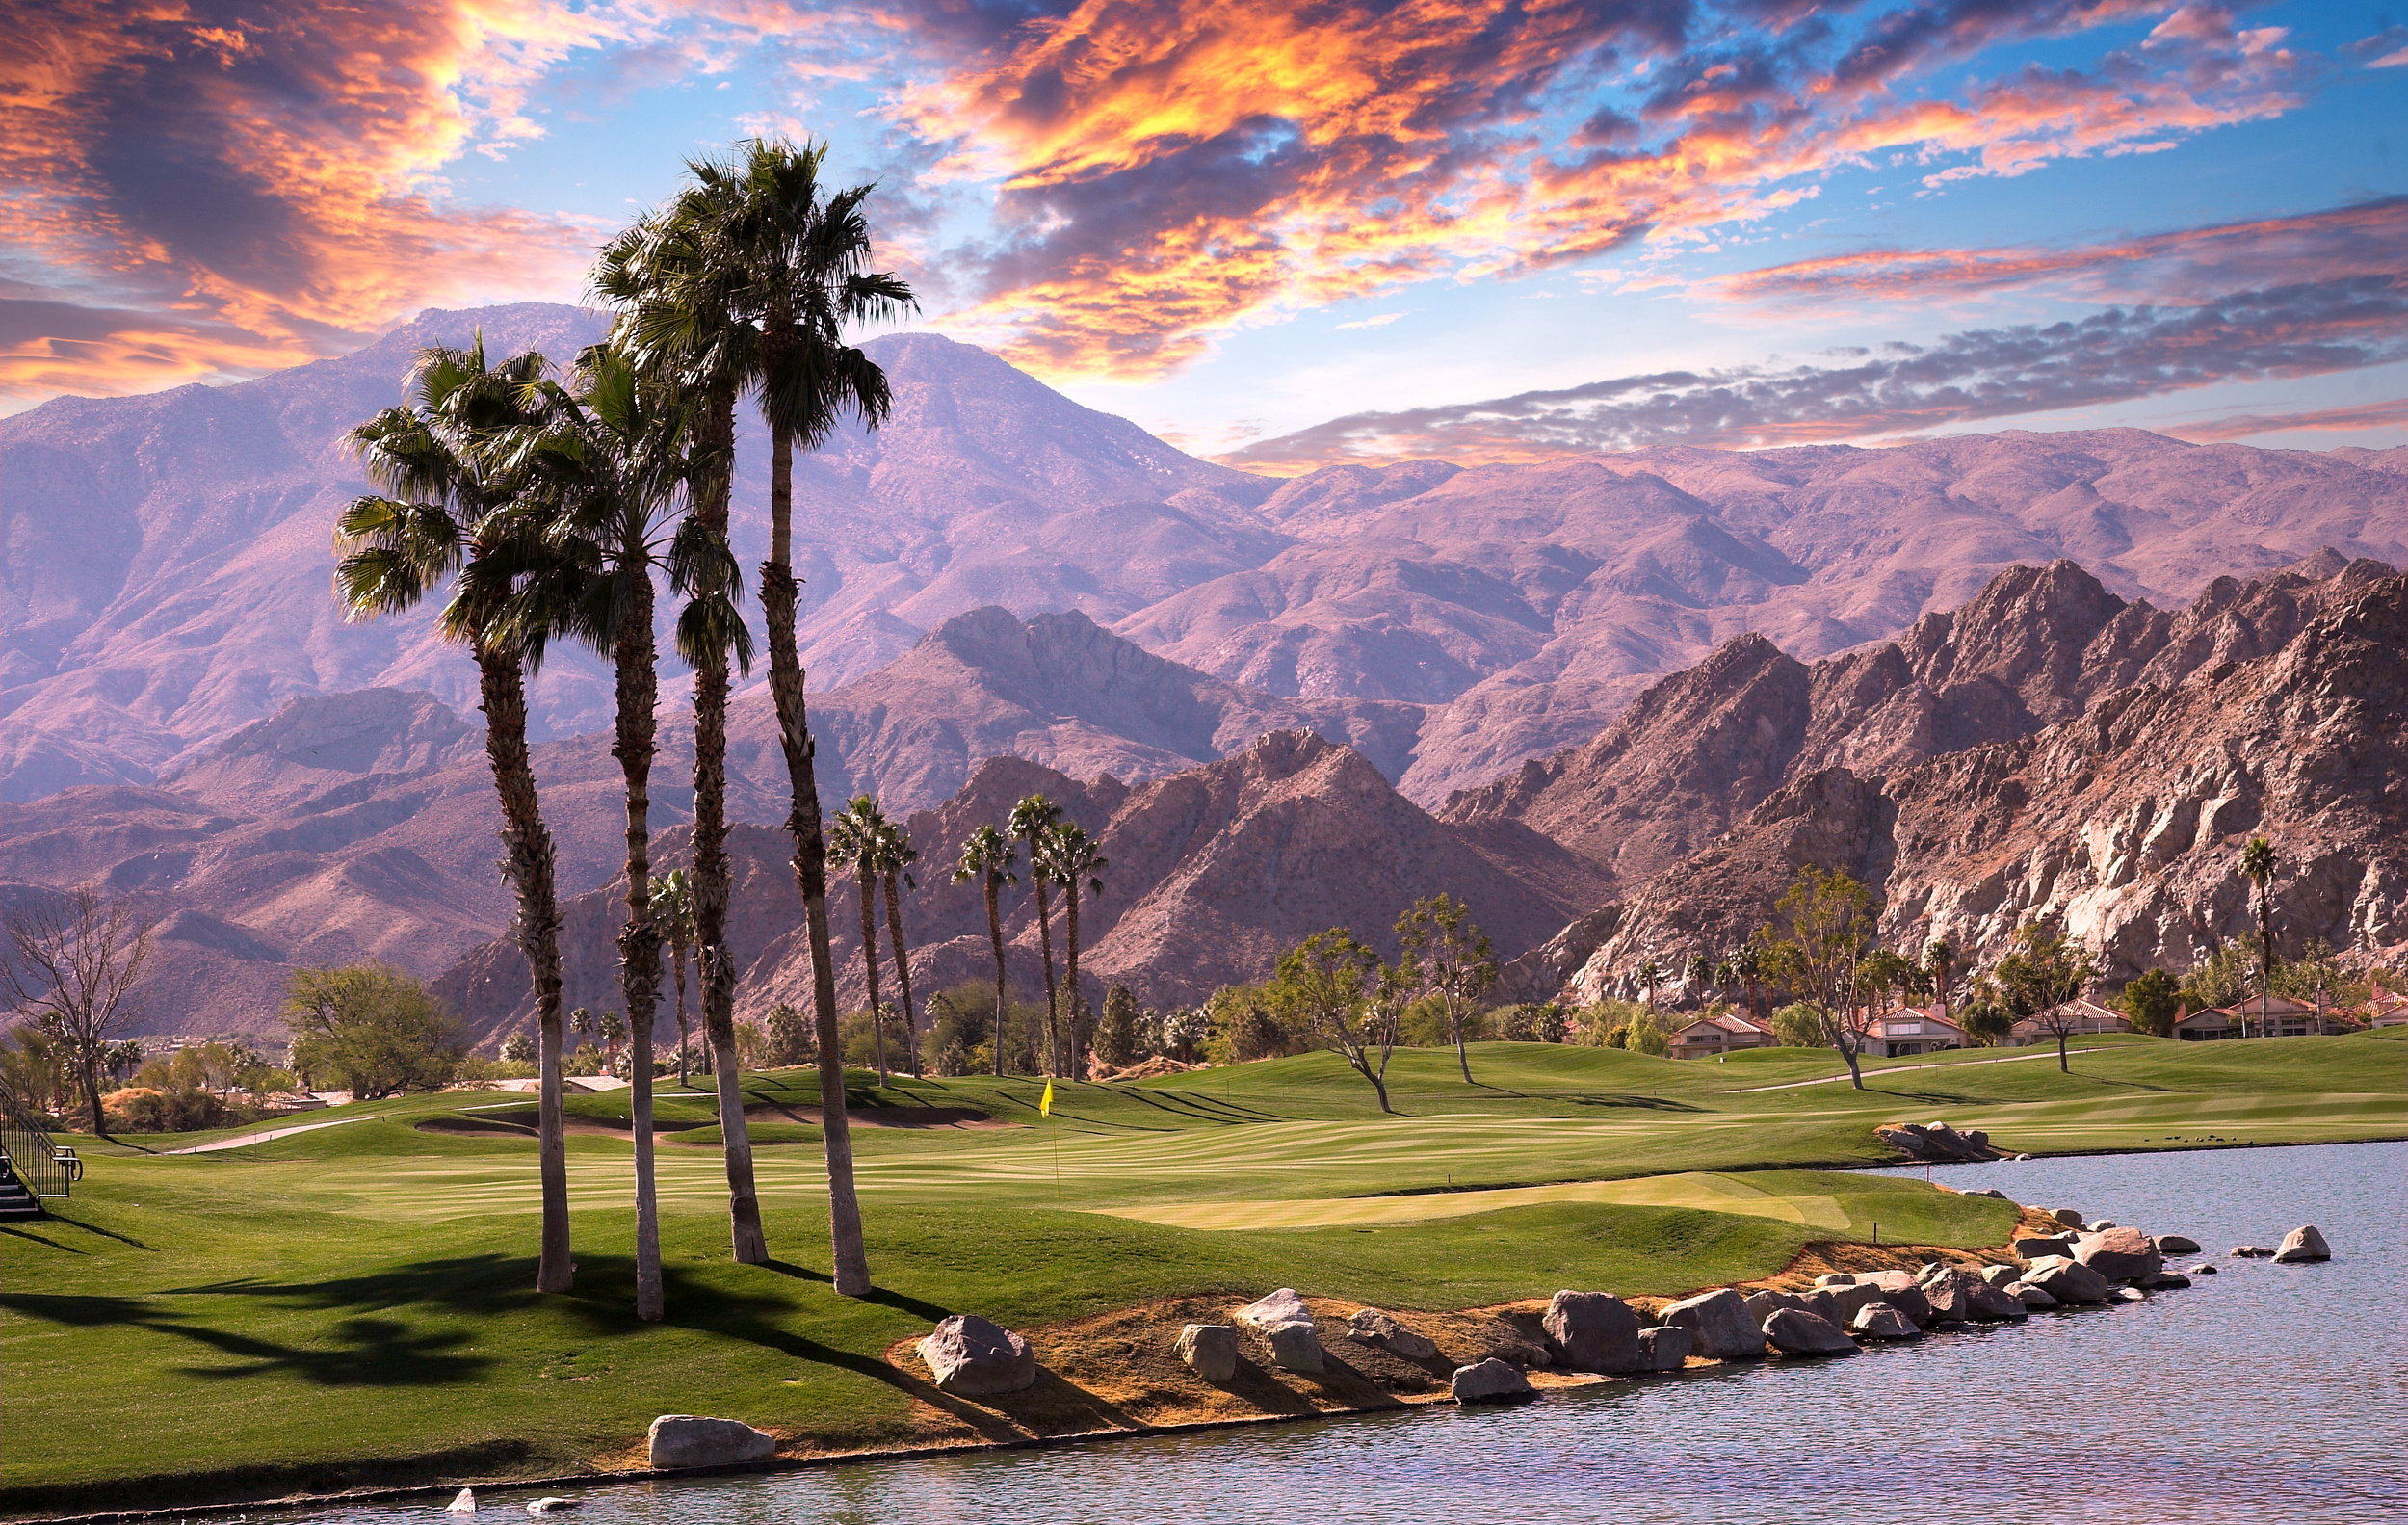 <p>We’ve focused a lot on coastal holiday options so far, but sometimes a desert getaway is what you need. Kick the winter blues in Palm Springs, where temps are rarely below the 50s, and you can enjoy the outdoors year-round.</p><p><a href='https://www.msn.com/en-us/community/channel/vid-cj9pqbr0vn9in2b6ddcd8sfgpfq6x6utp44fssrv6mc2gtybw0us'>Follow us on MSN to see more of our exclusive lifestyle content.</a></p>